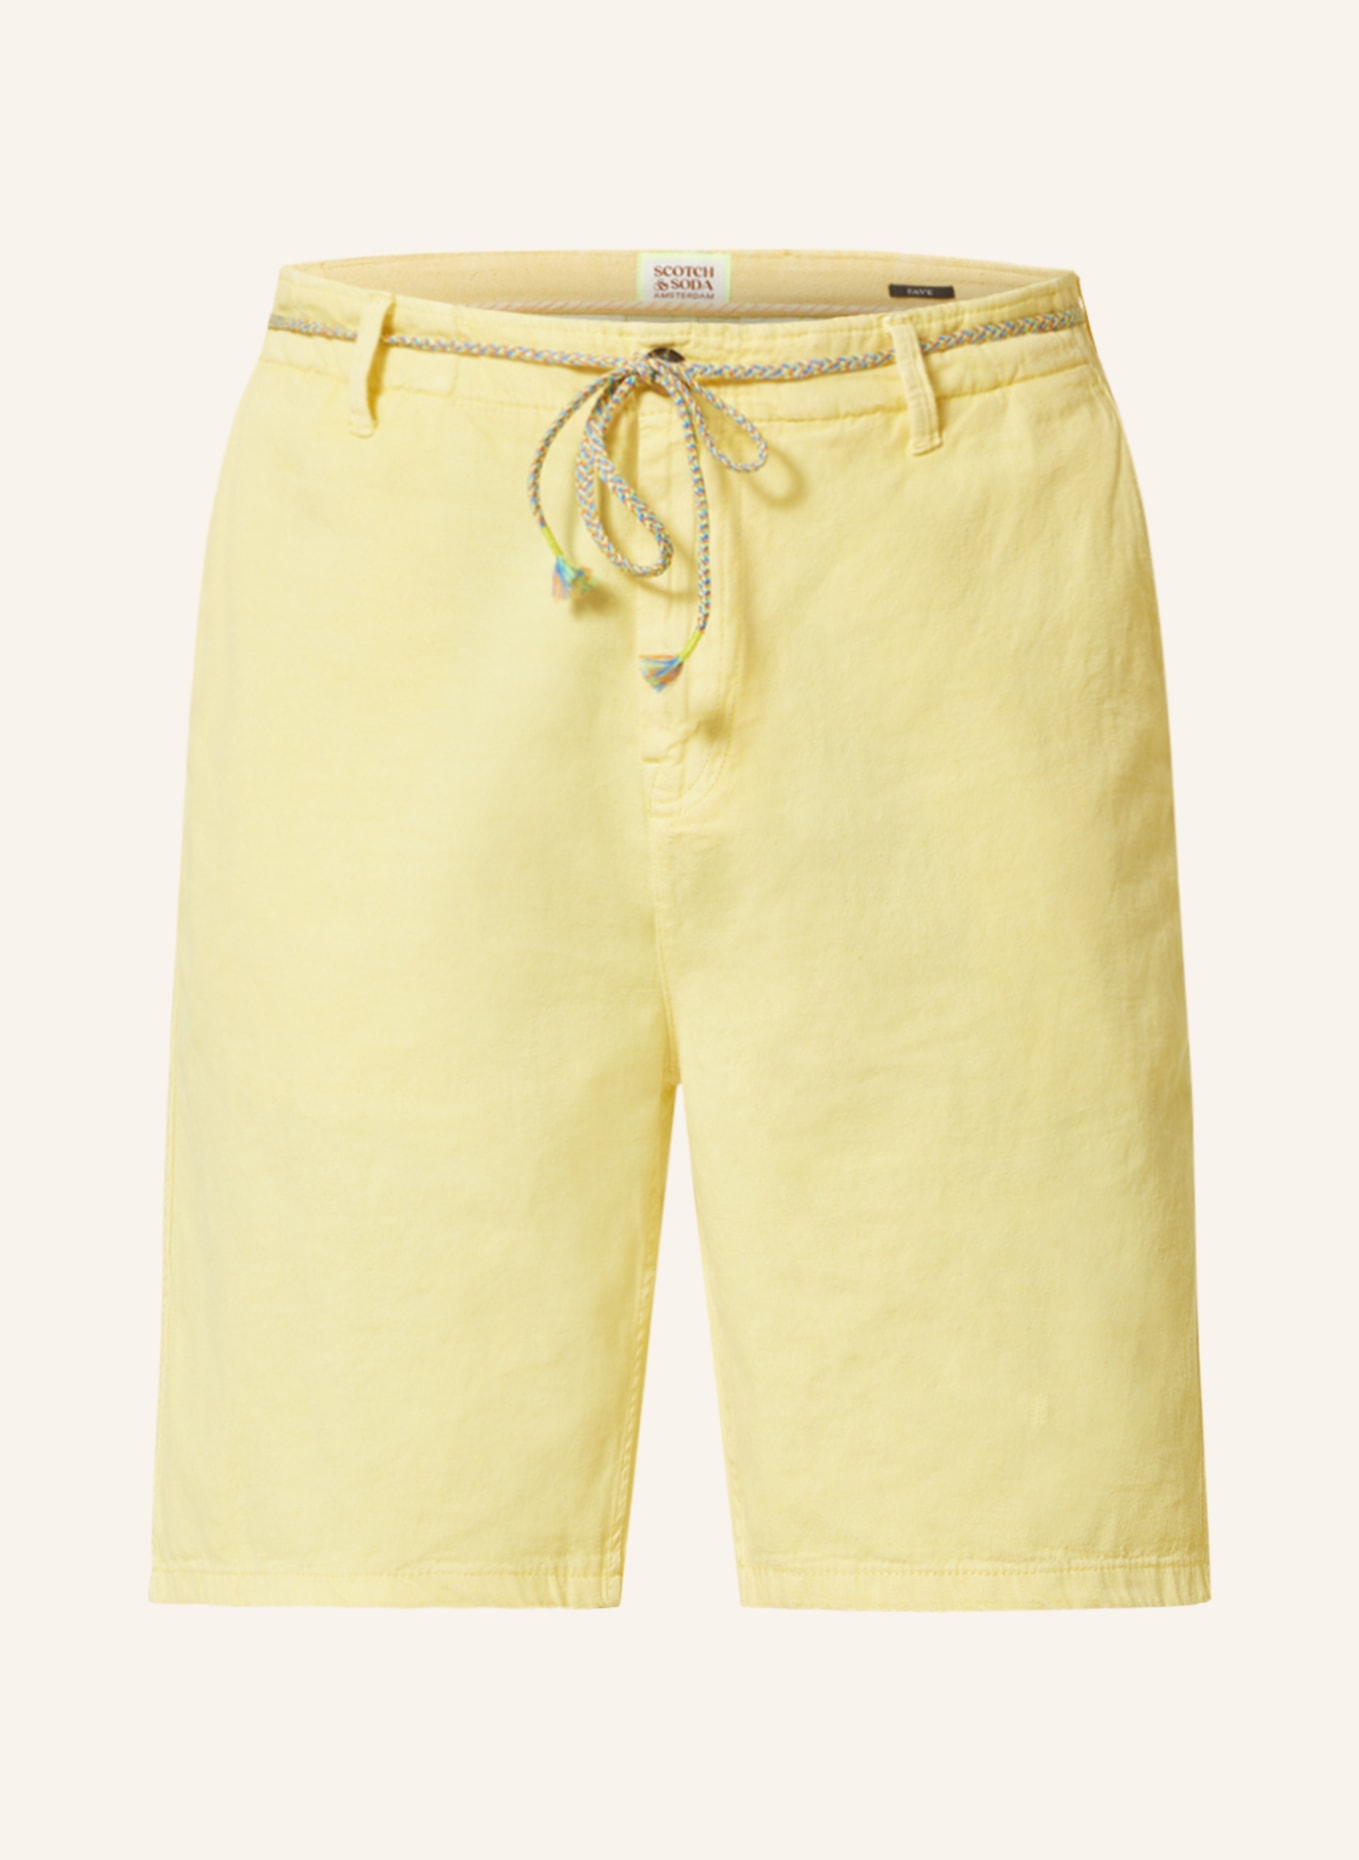 SCOTCH & SODA Shorts FAVE regular fit, Color: YELLOW (Image 1)